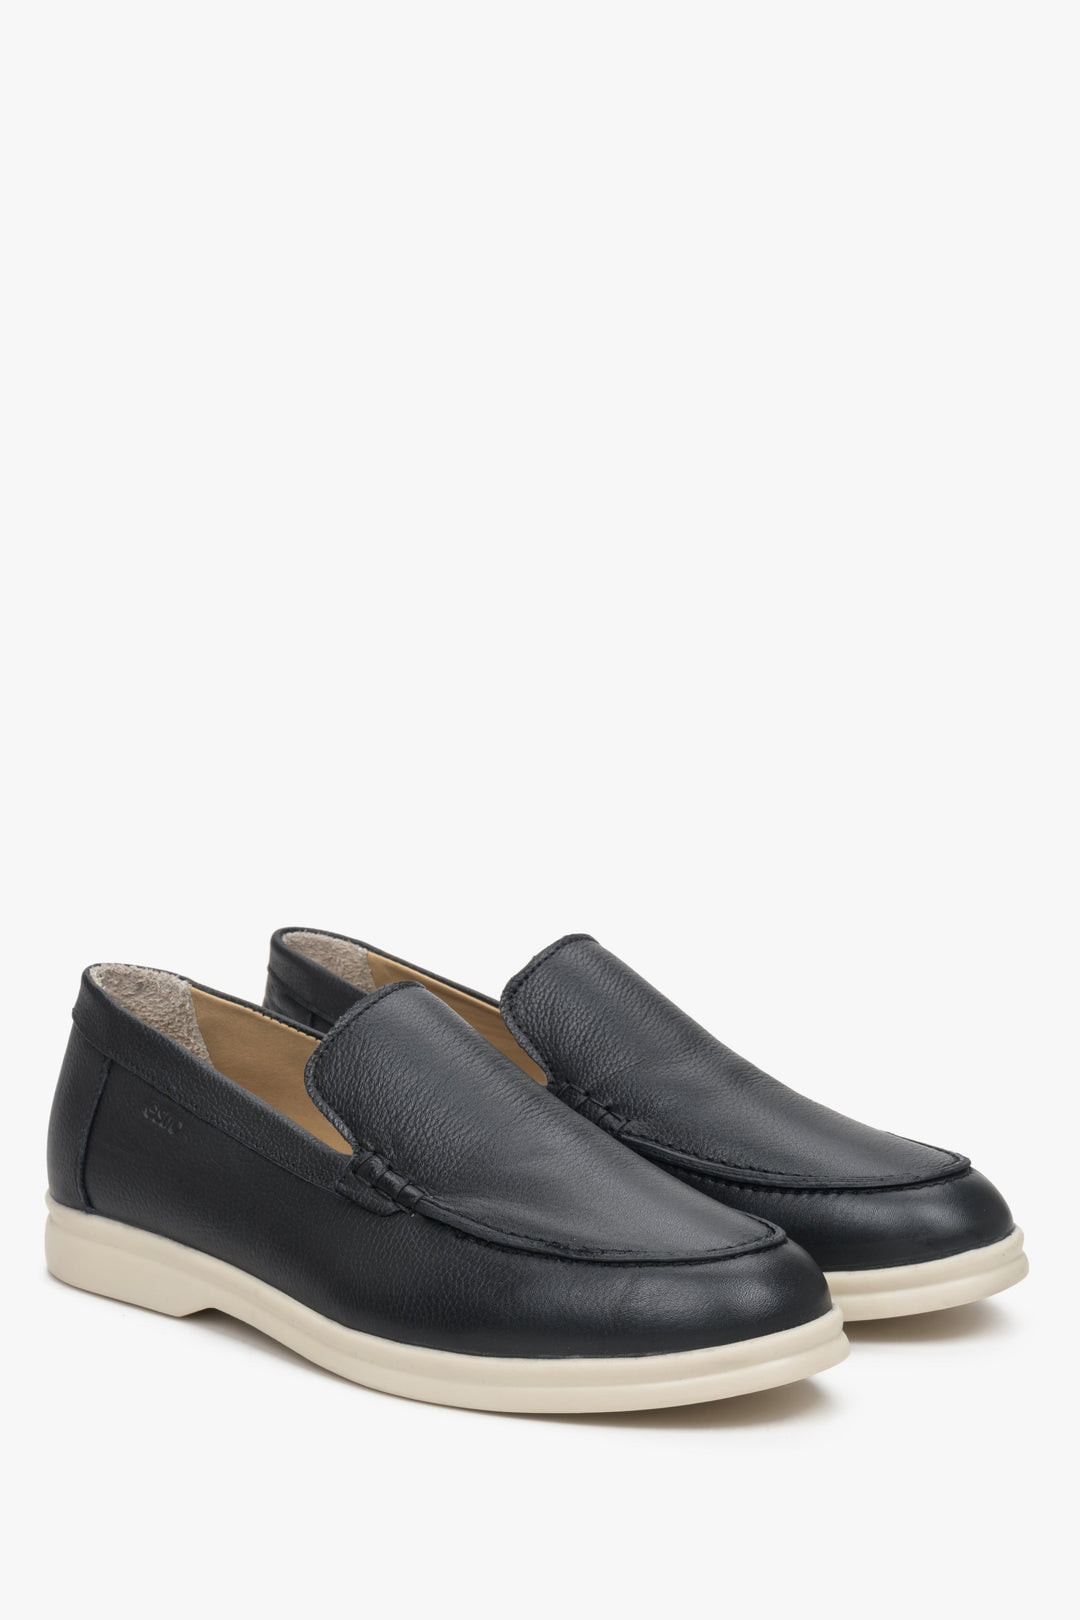 Stylish women's loafers in black leather - exhibiting the footwear's alternate side.